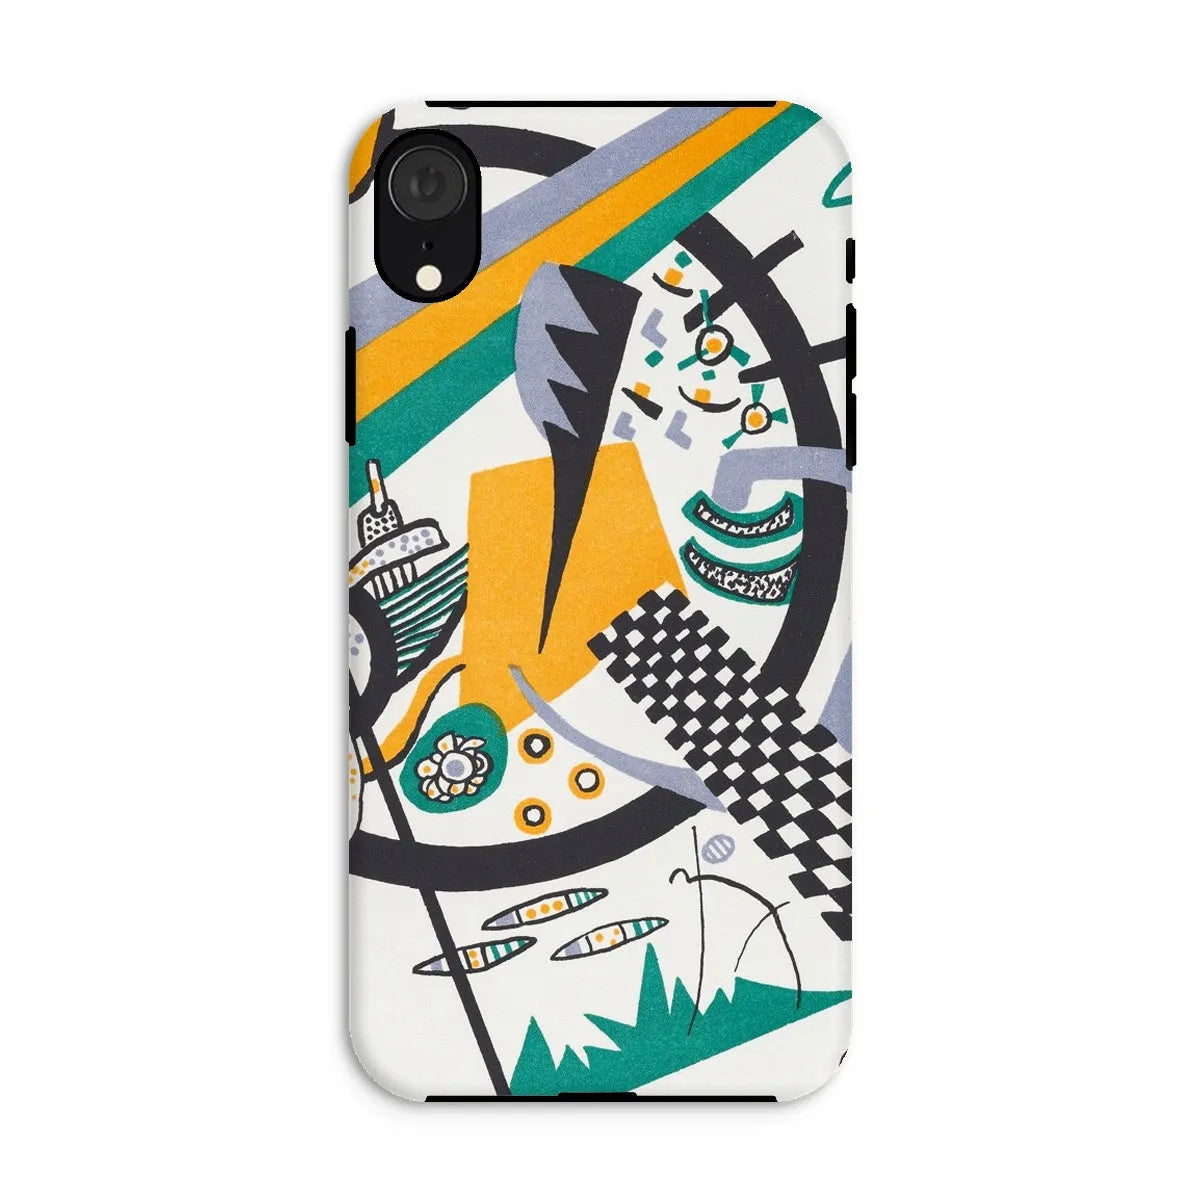 Small Worlds Iv - Expressionist Phone Case - Wassily Kandinsky - Iphone Xr / Matte - Mobile Phone Cases - Aesthetic Art